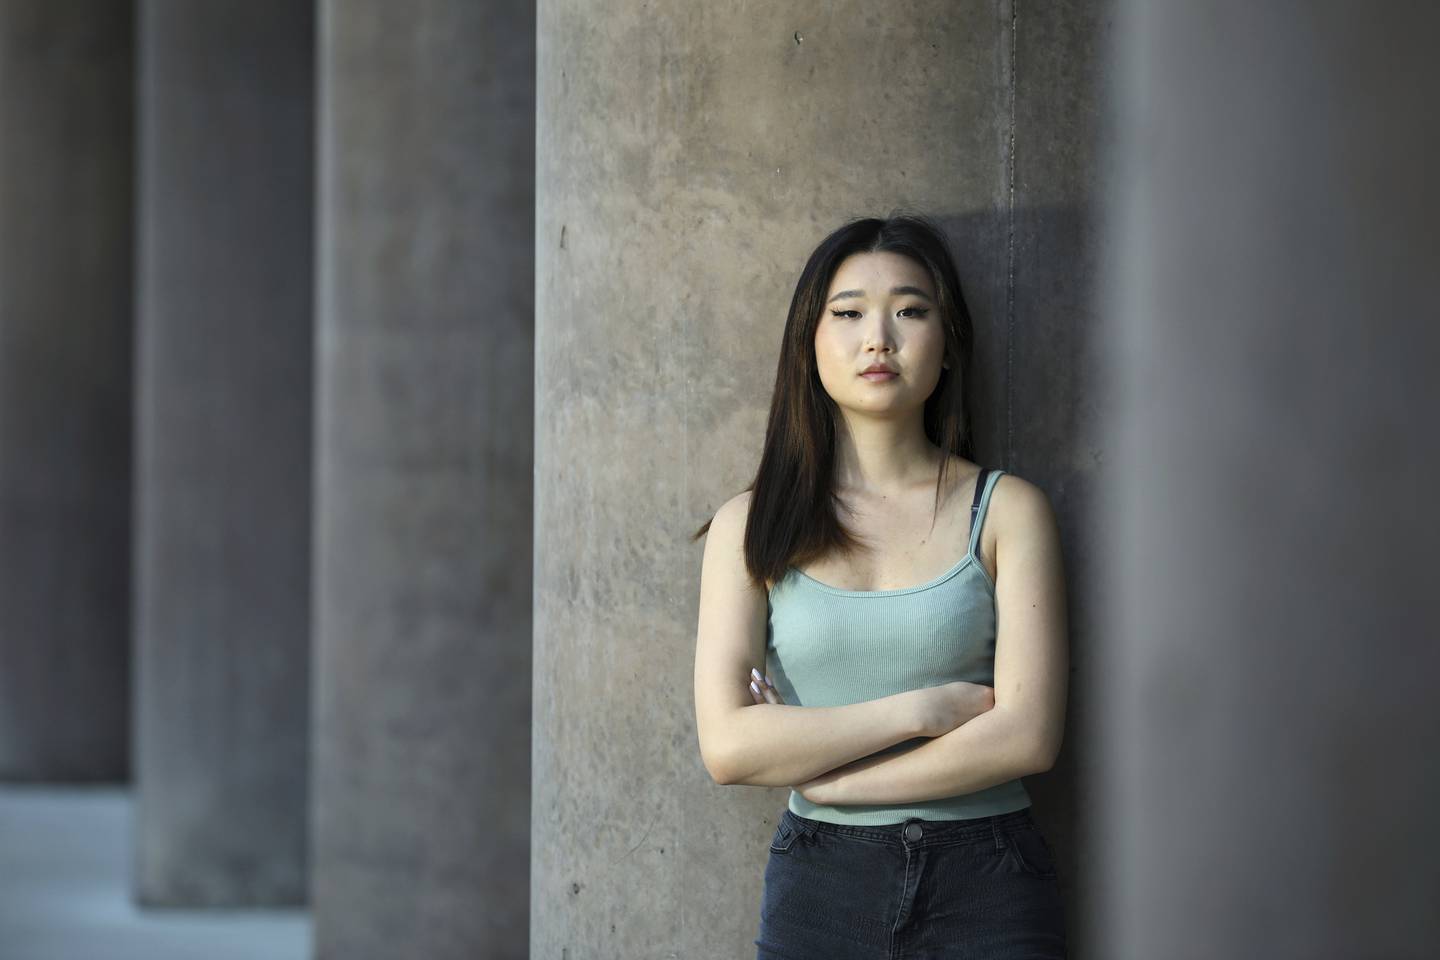 Kaylyn Ahn, 18, testified before the House and Senate in Springfield this spring in support of the sexual assault bill that could make it easier to prosecute cases where alleged victims became too intoxicated to consent to sexual activity.